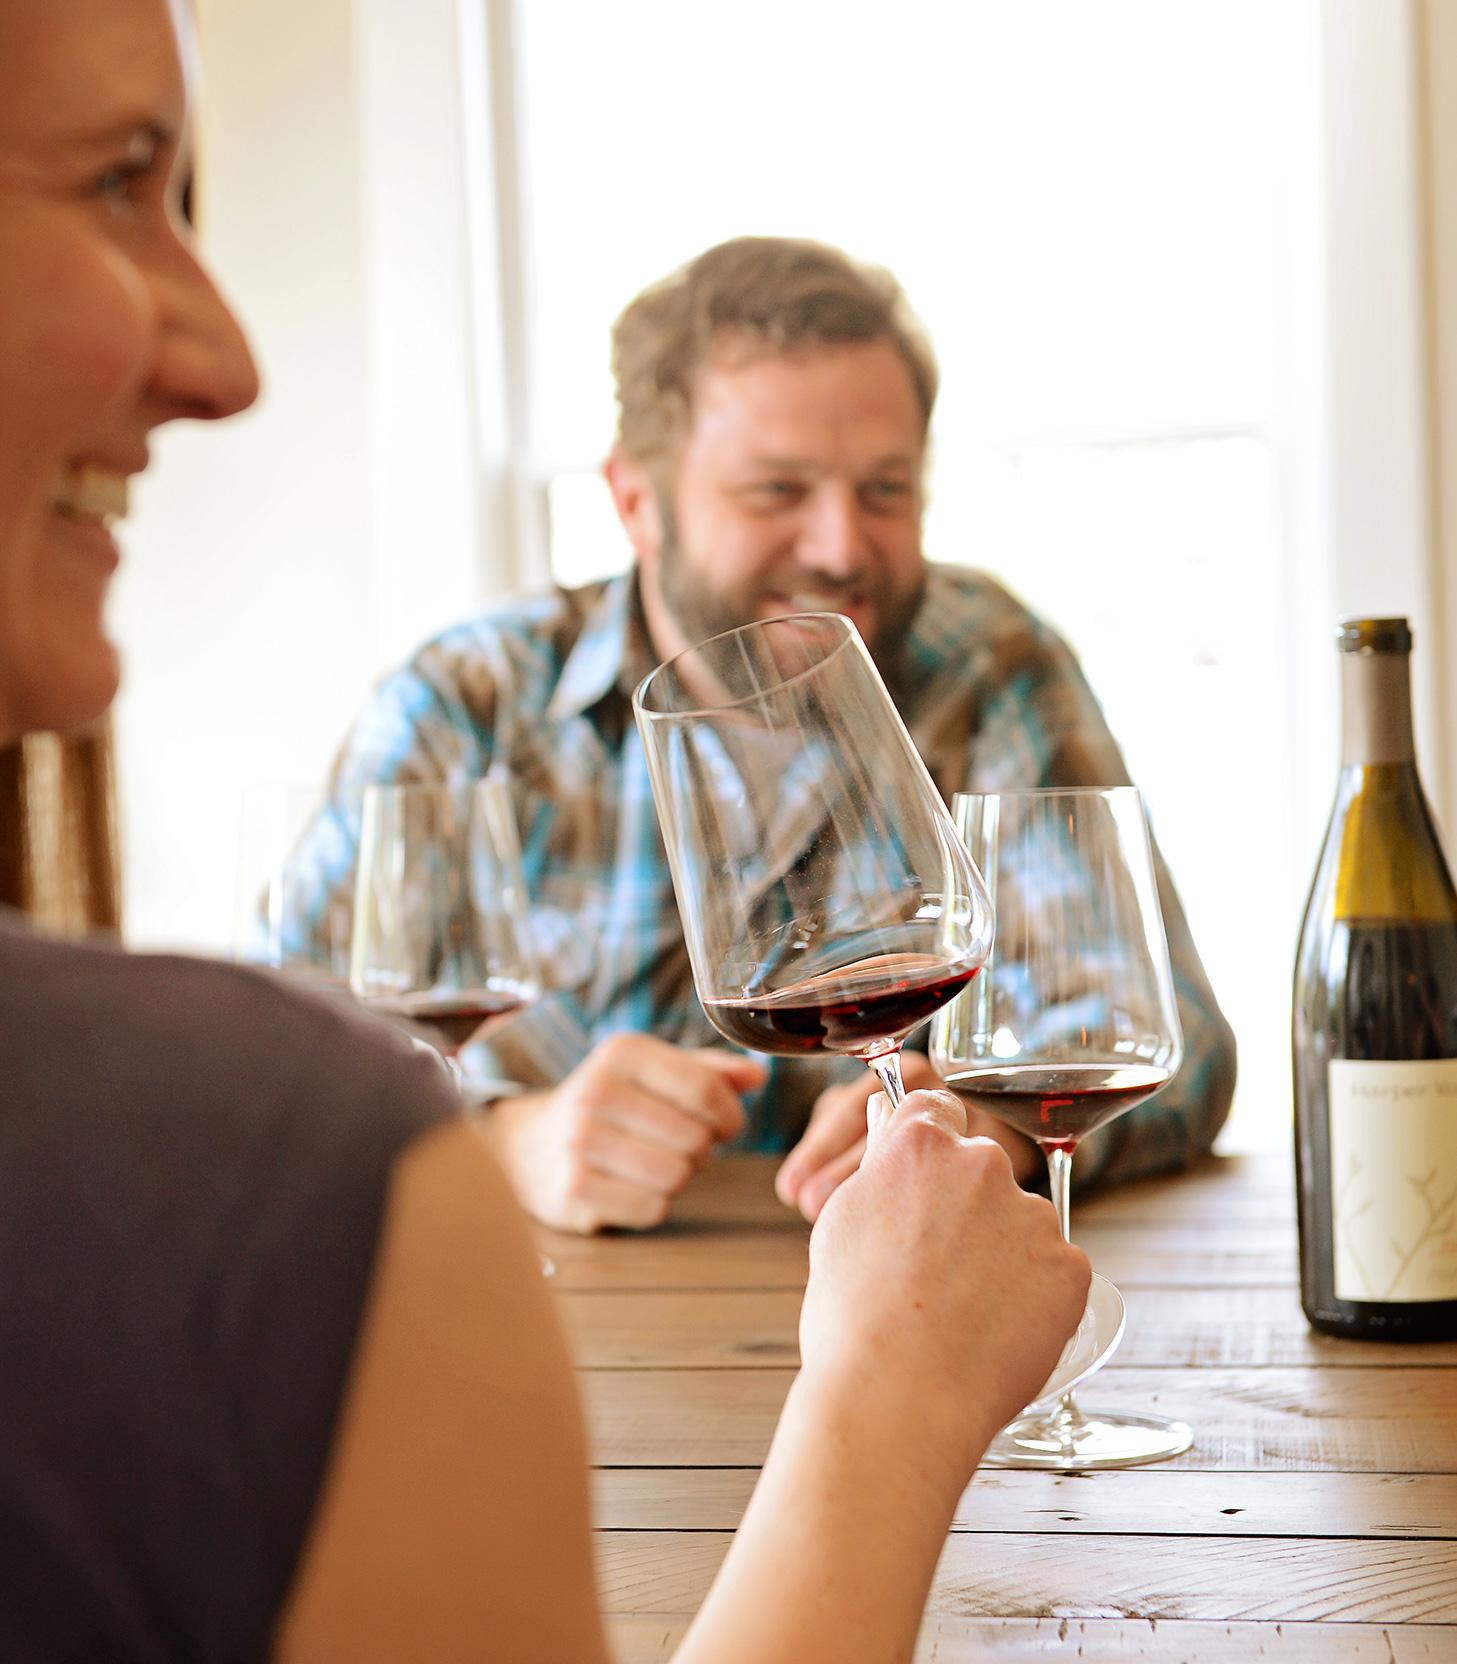 two people seated a table smiling. one holds a glass of wine